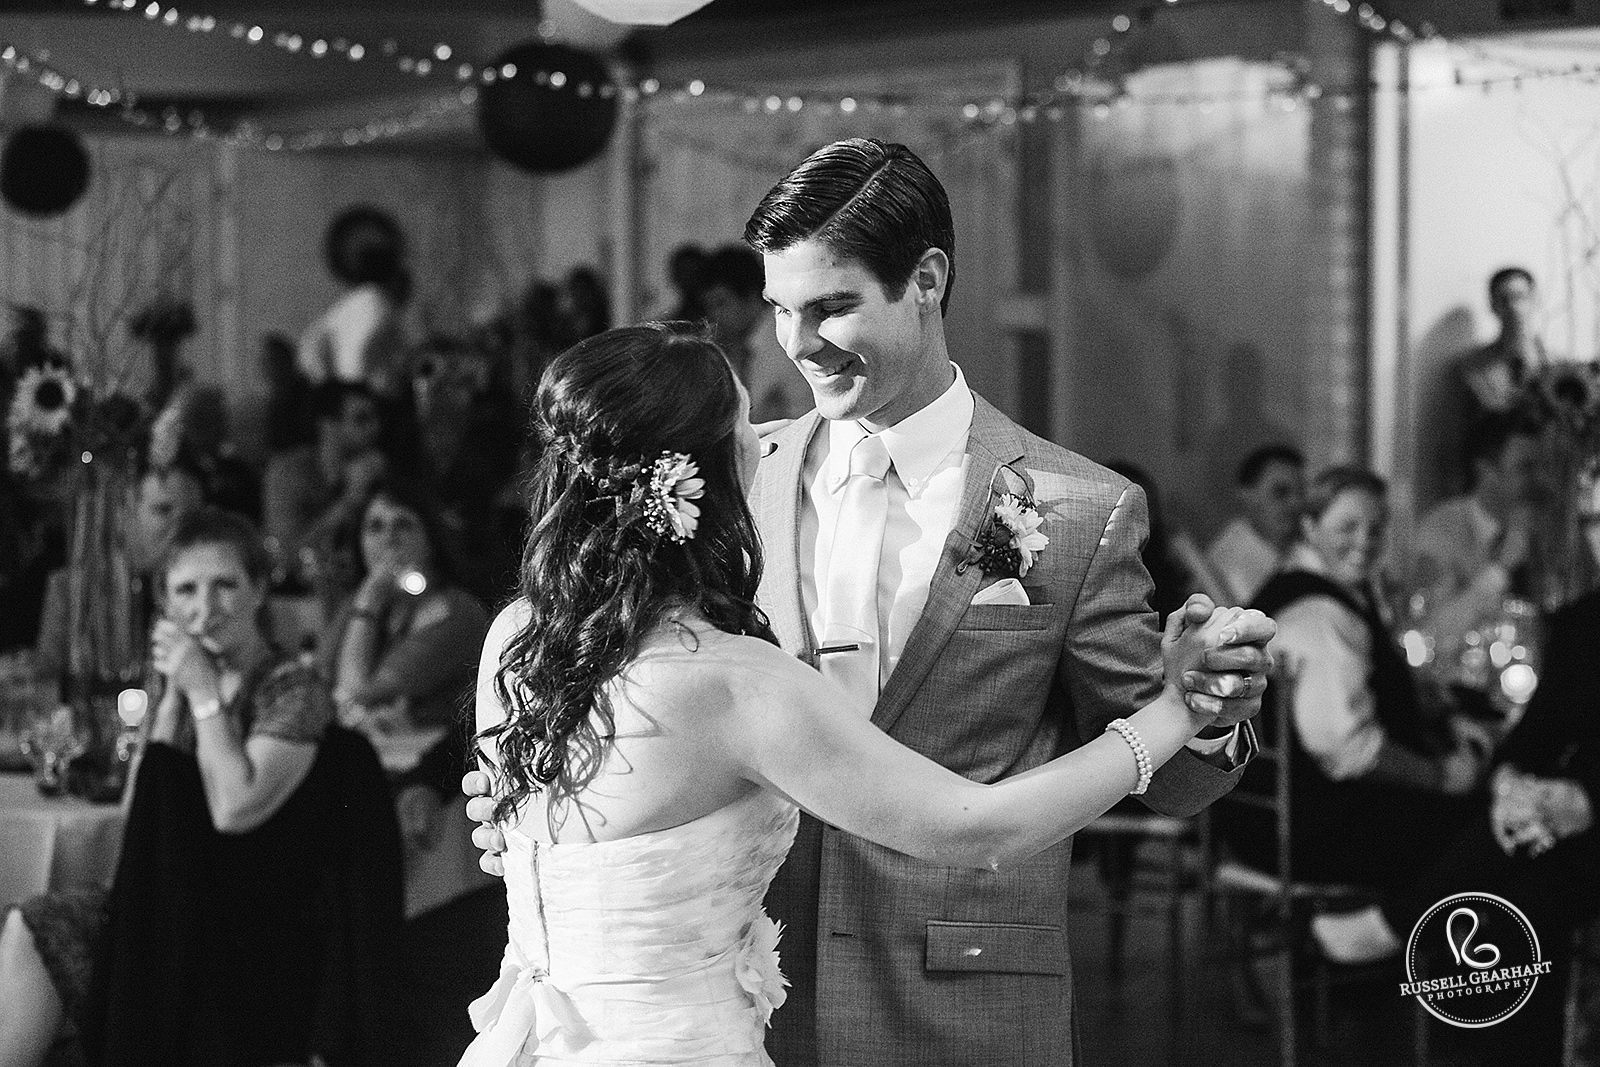 First Dance - Southern California Wedding – Russell Gearhart Photography – www.gearhartphoto.com